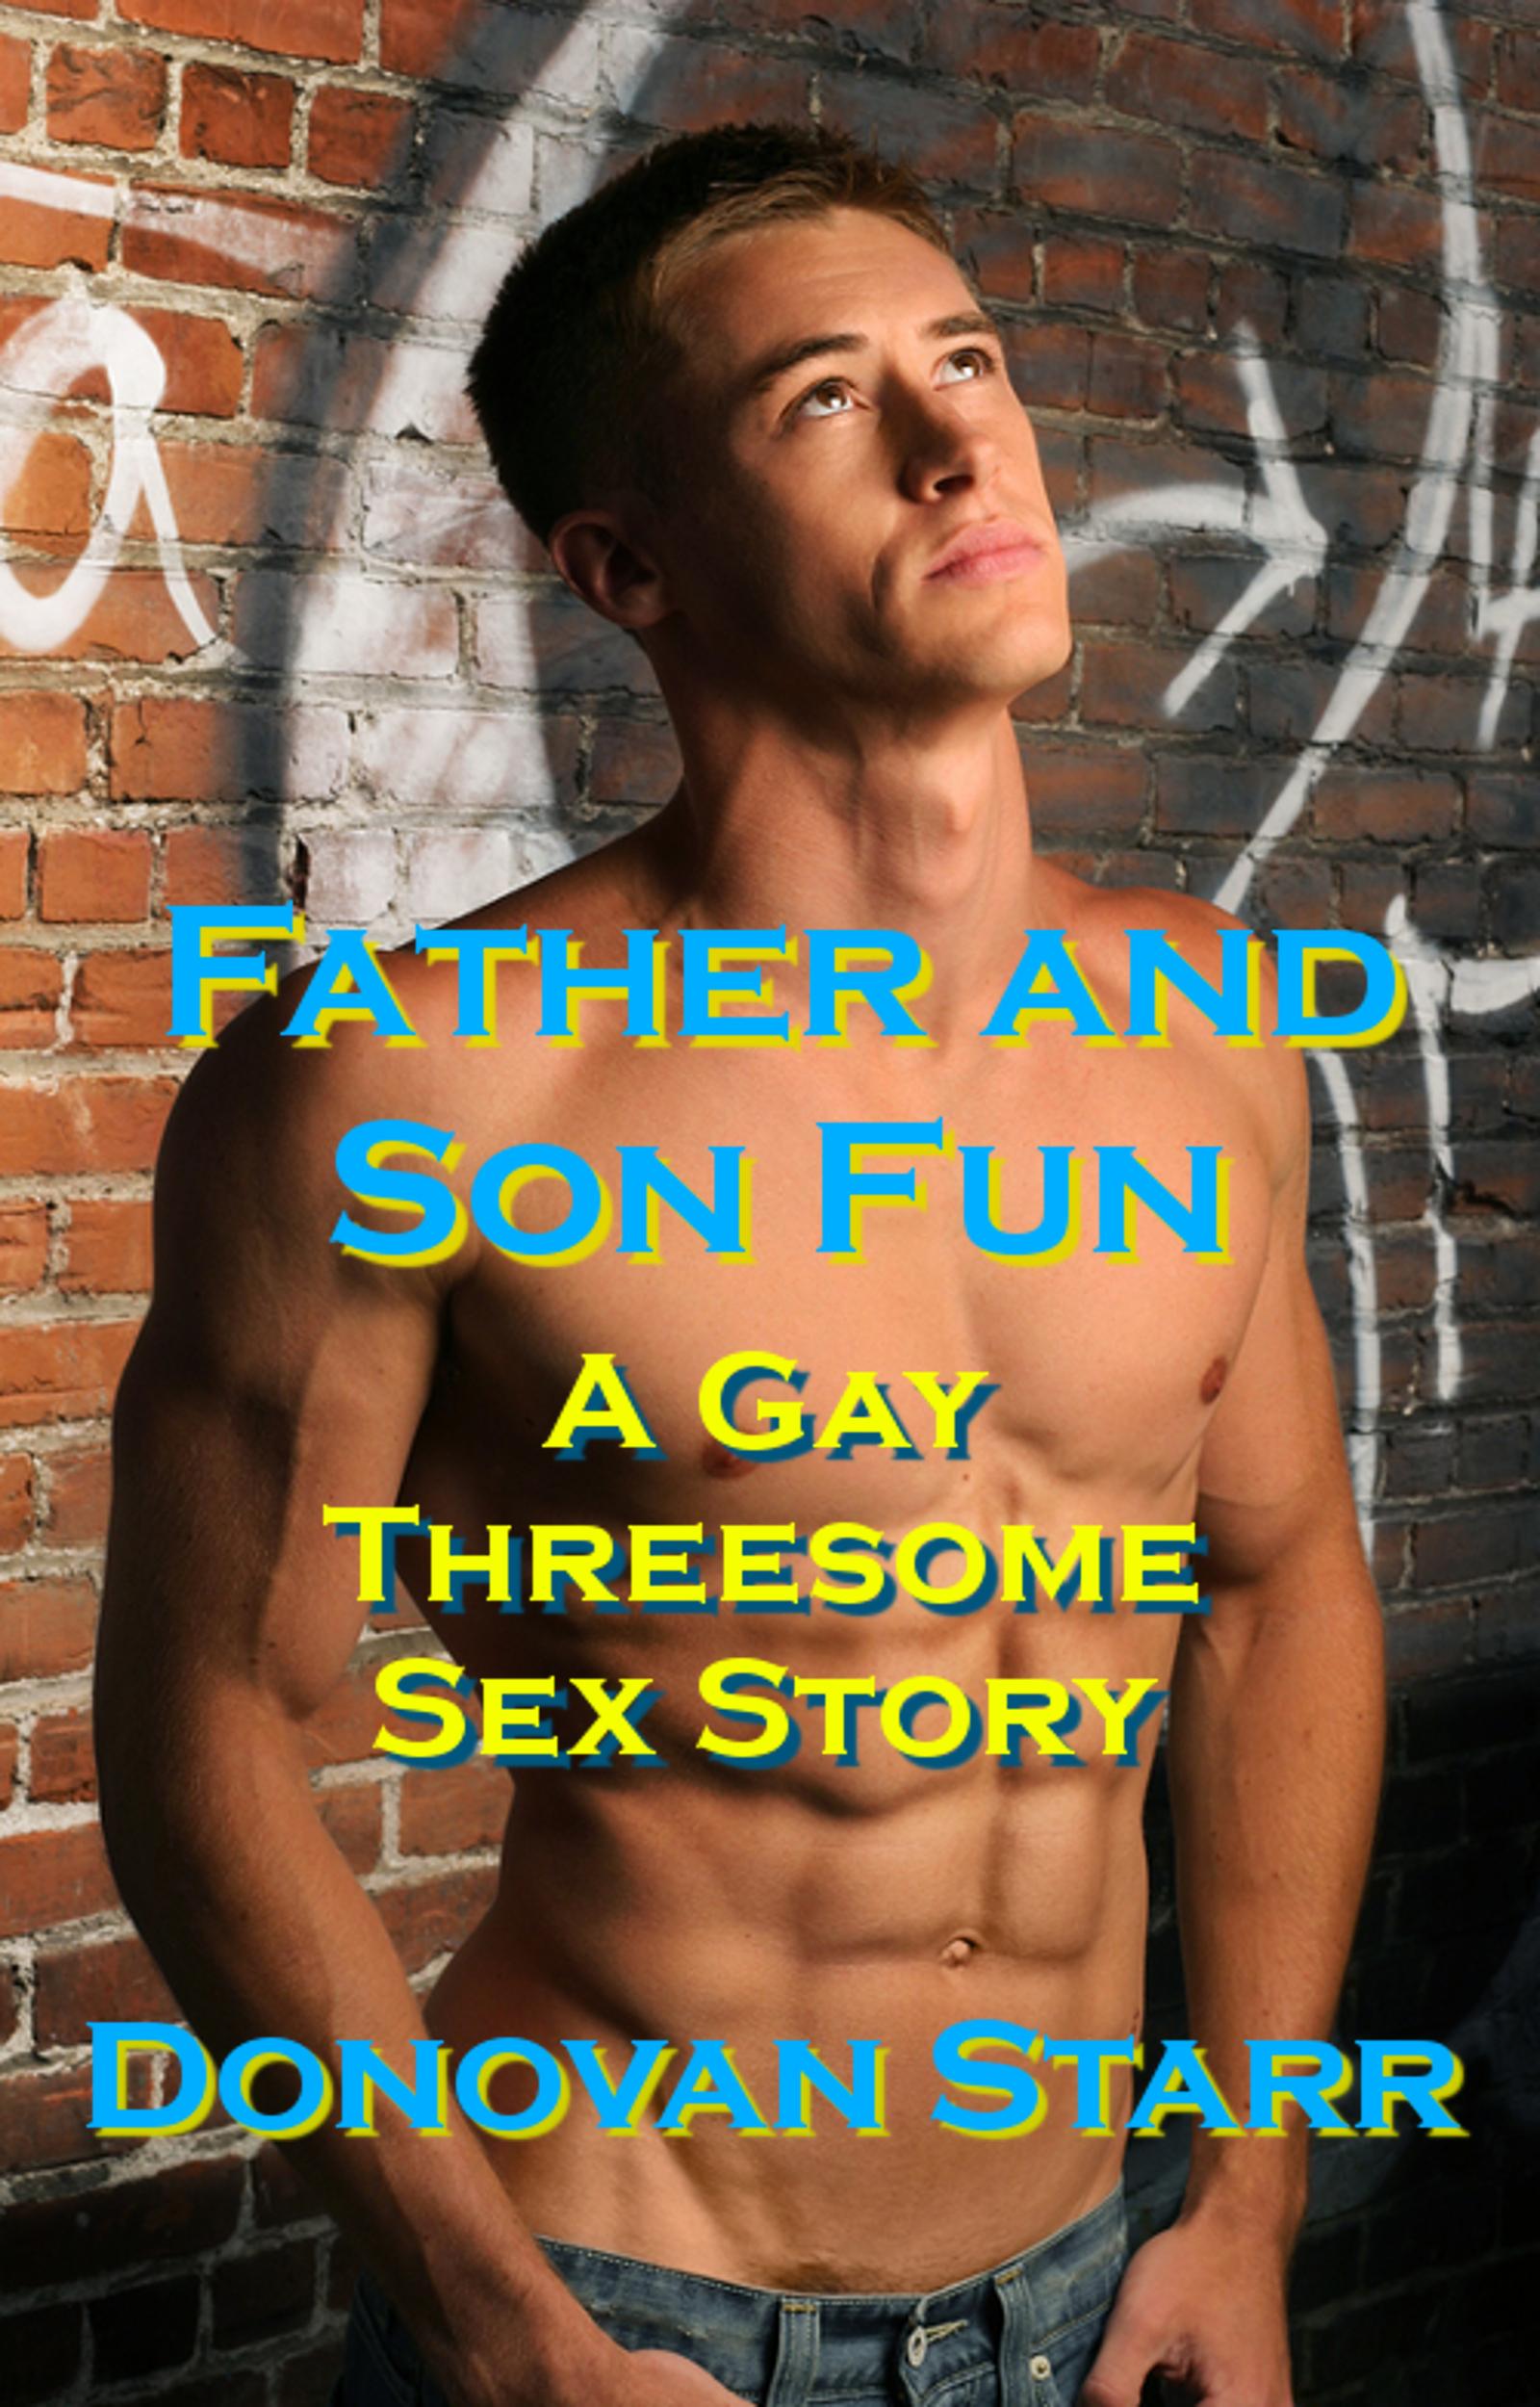 Gay threesome stories